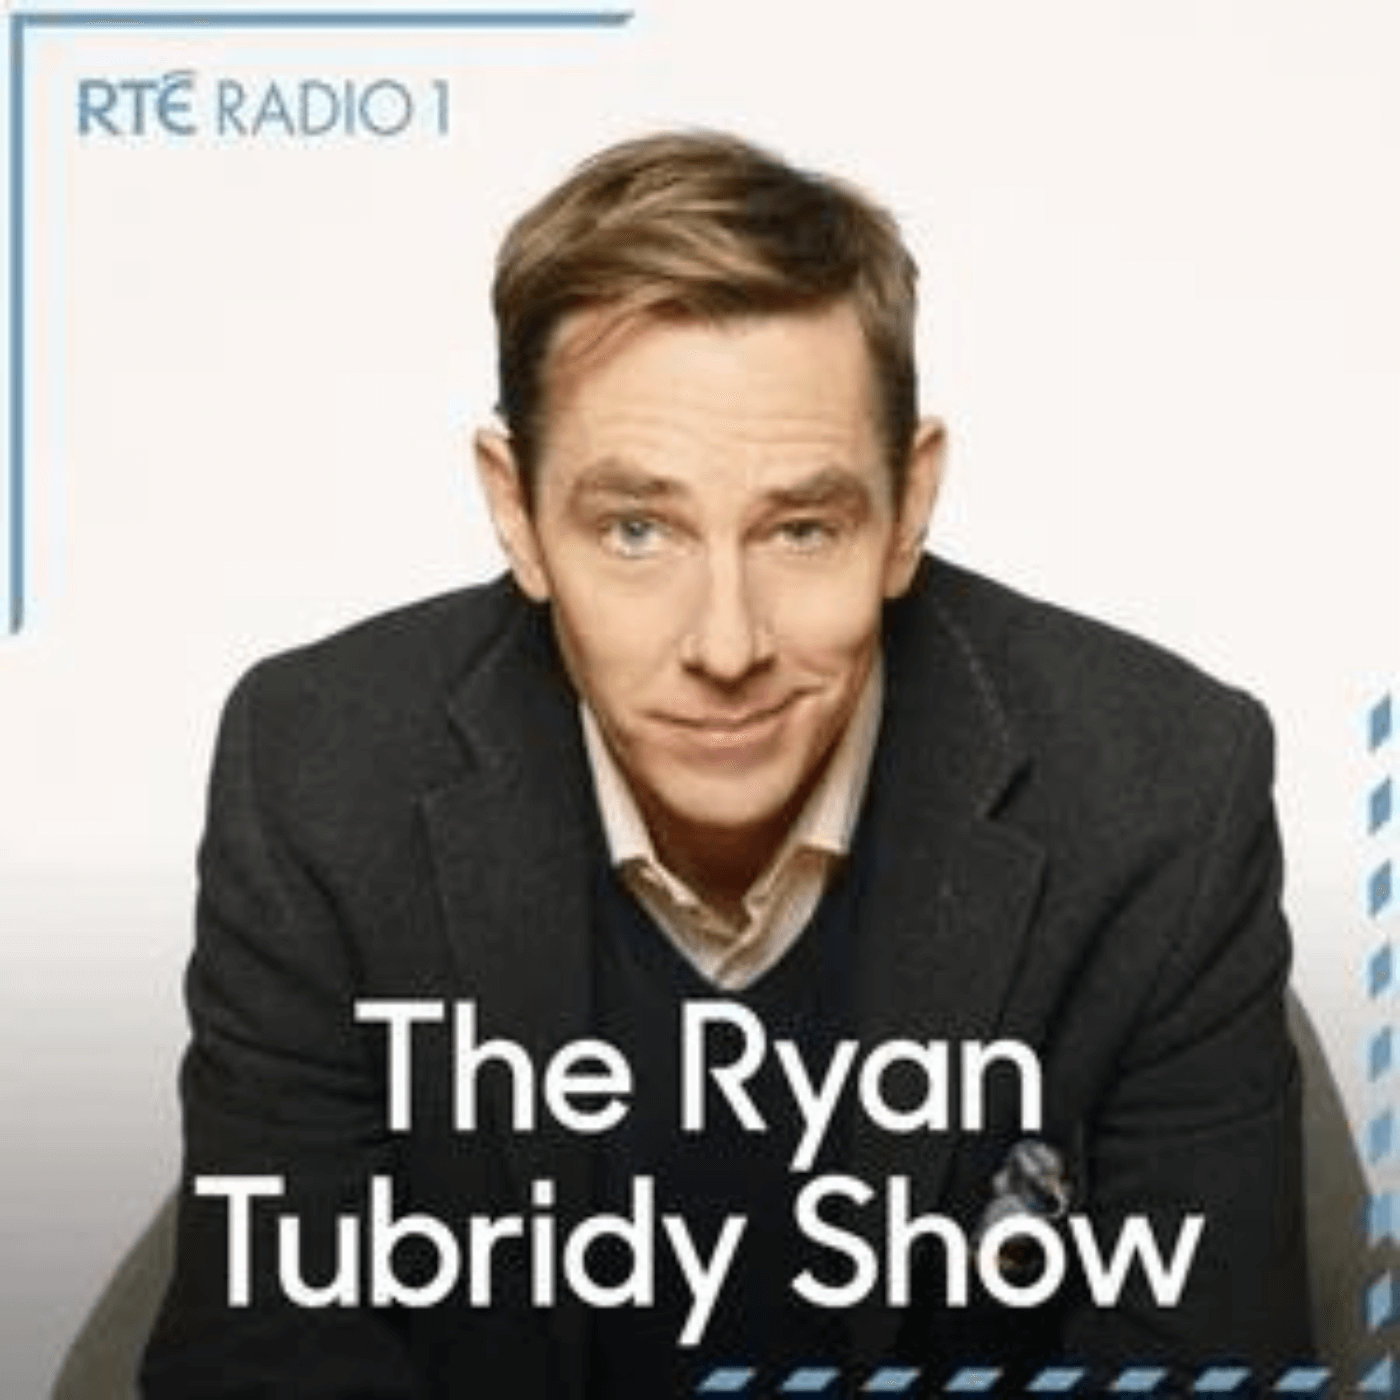 Sharon Huggard | Get In The Picture 2023 - The Ryan Tubridy Show